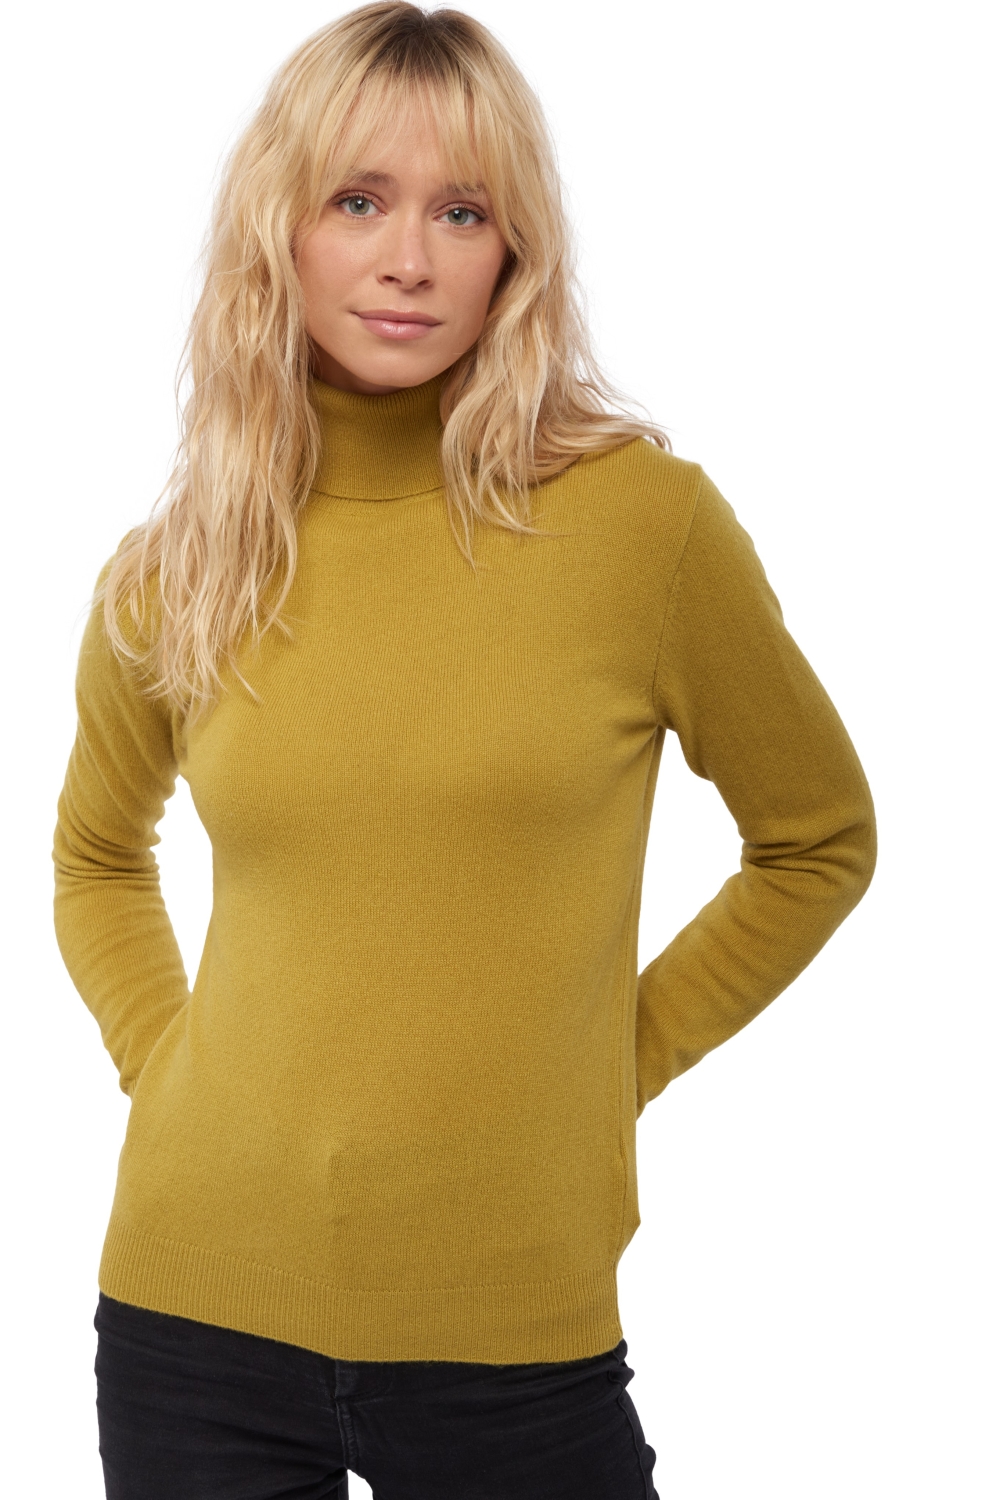 Cashmere ladies roll neck tale first caterpillar s